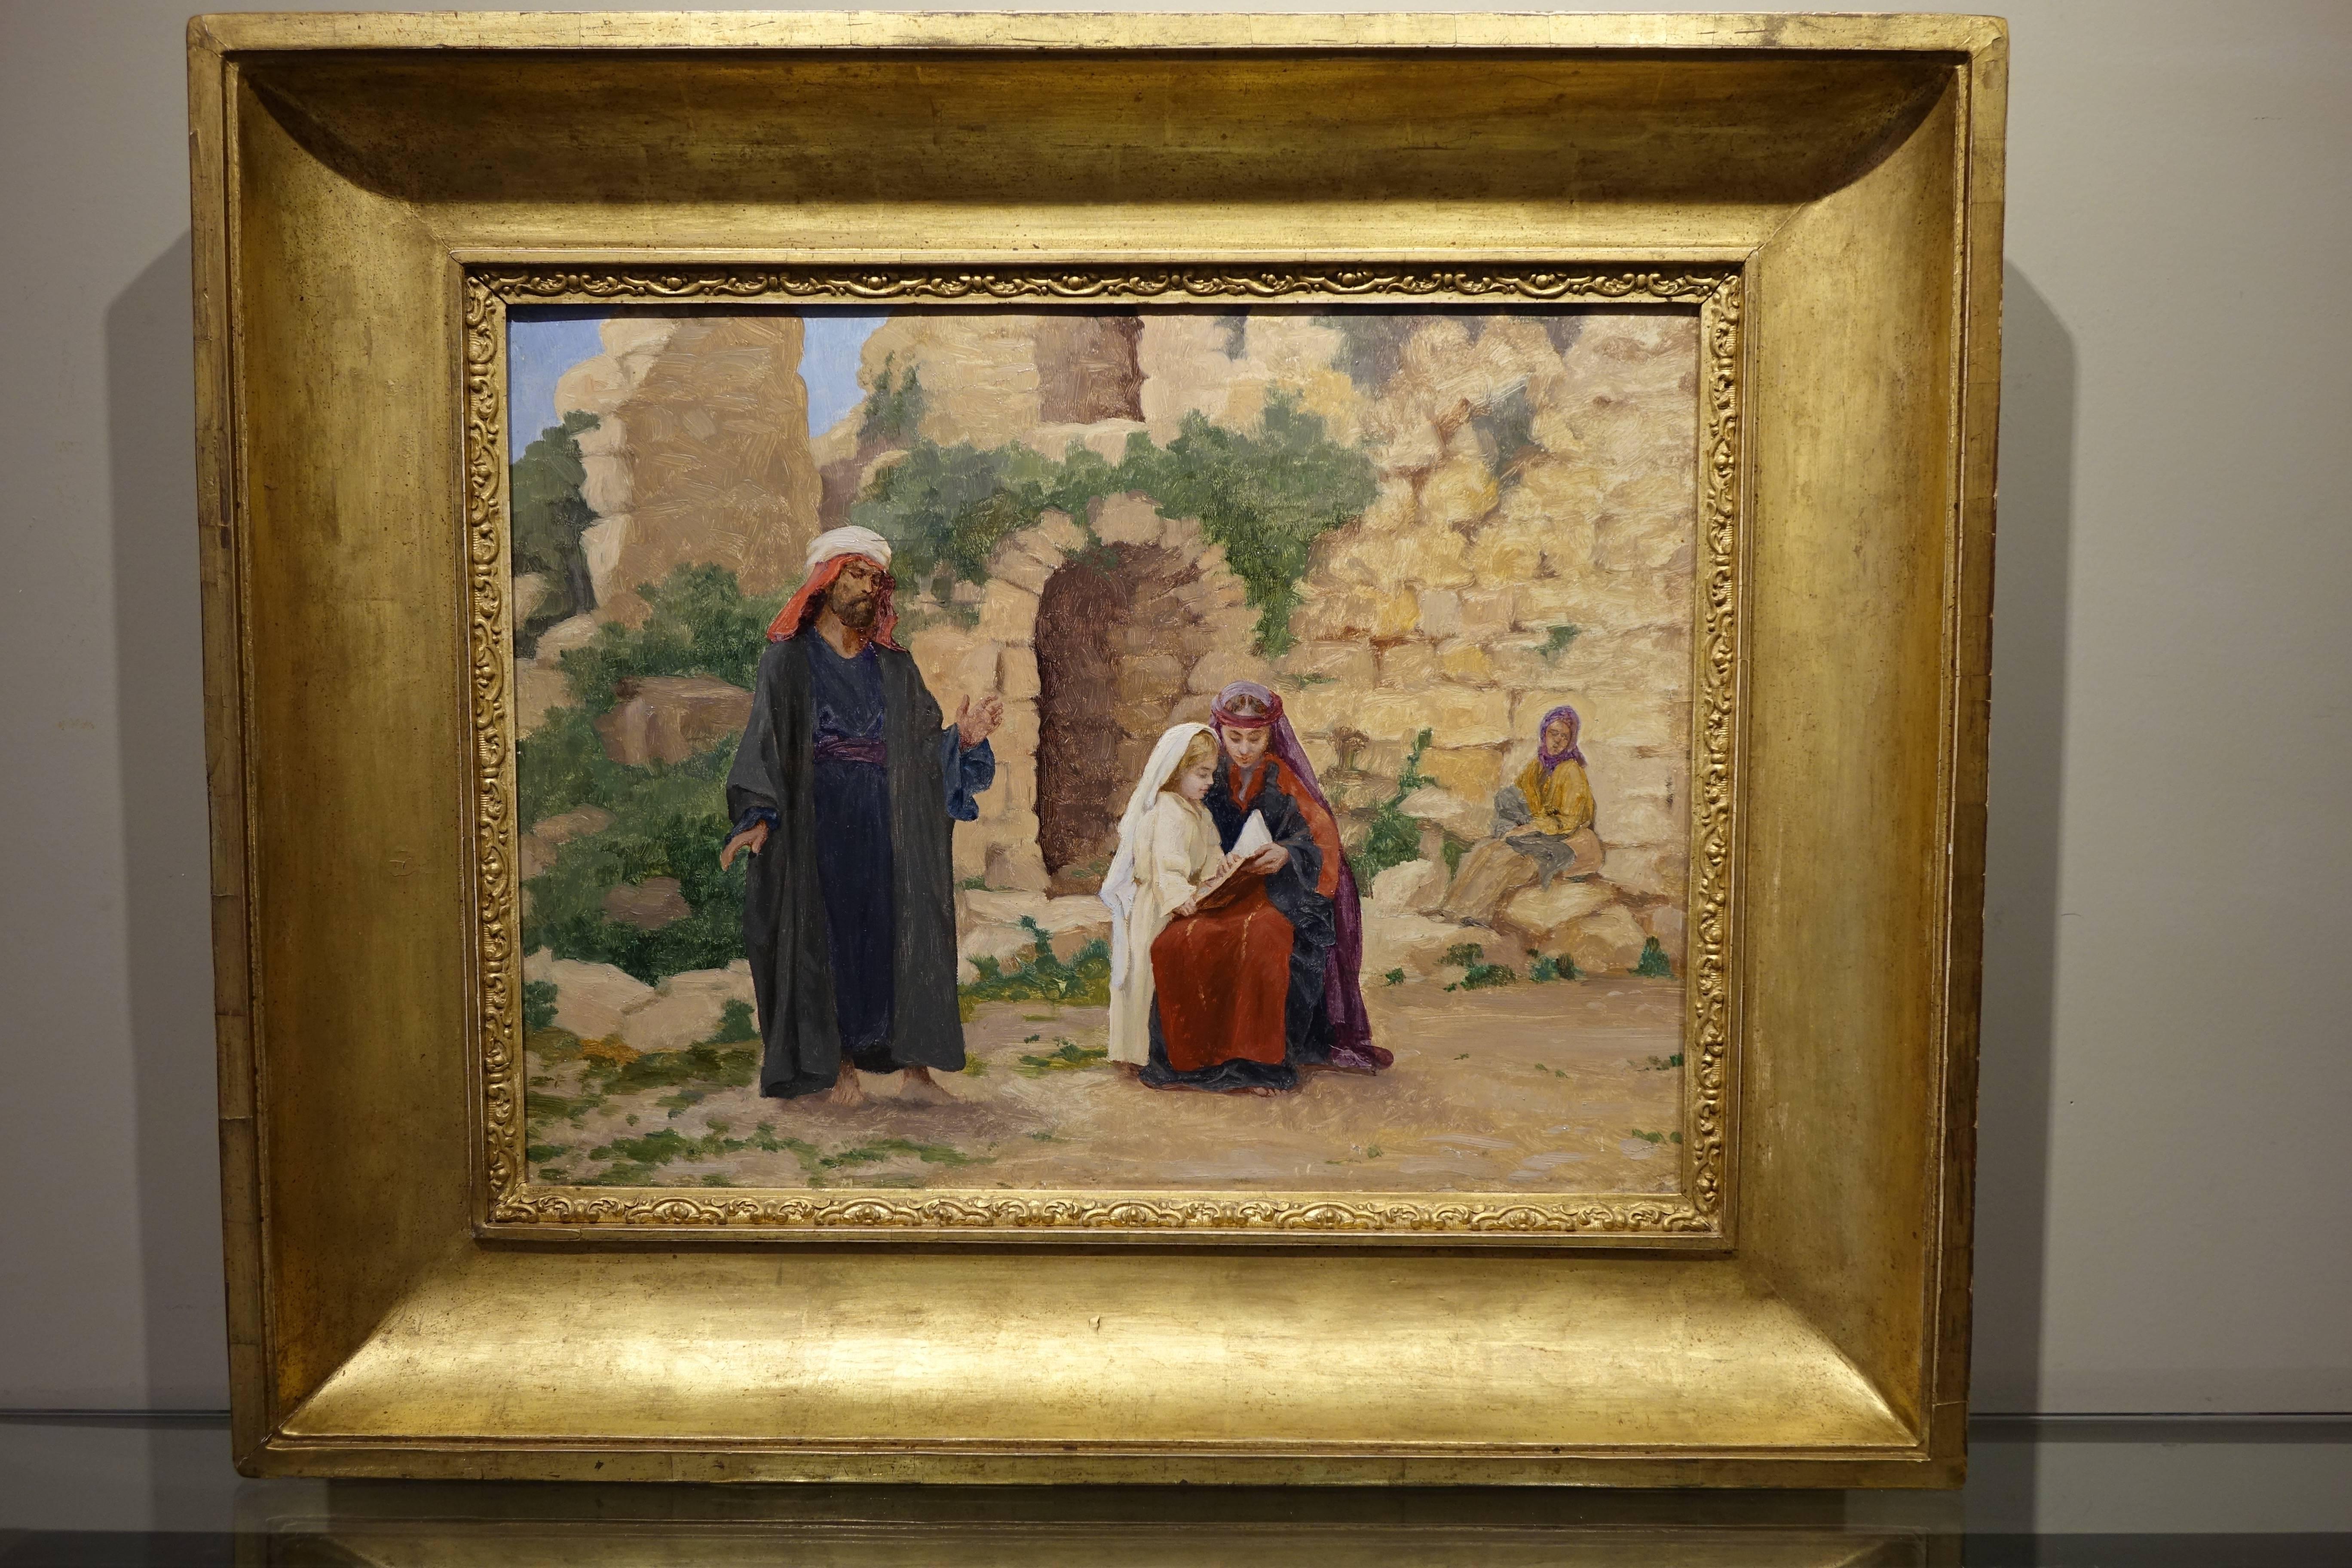 Pair of oil on canvas illustrating scenes of the Bible, France, circa 1900s.
Chassis frame Alan Hardy, manufacturer since 1848.